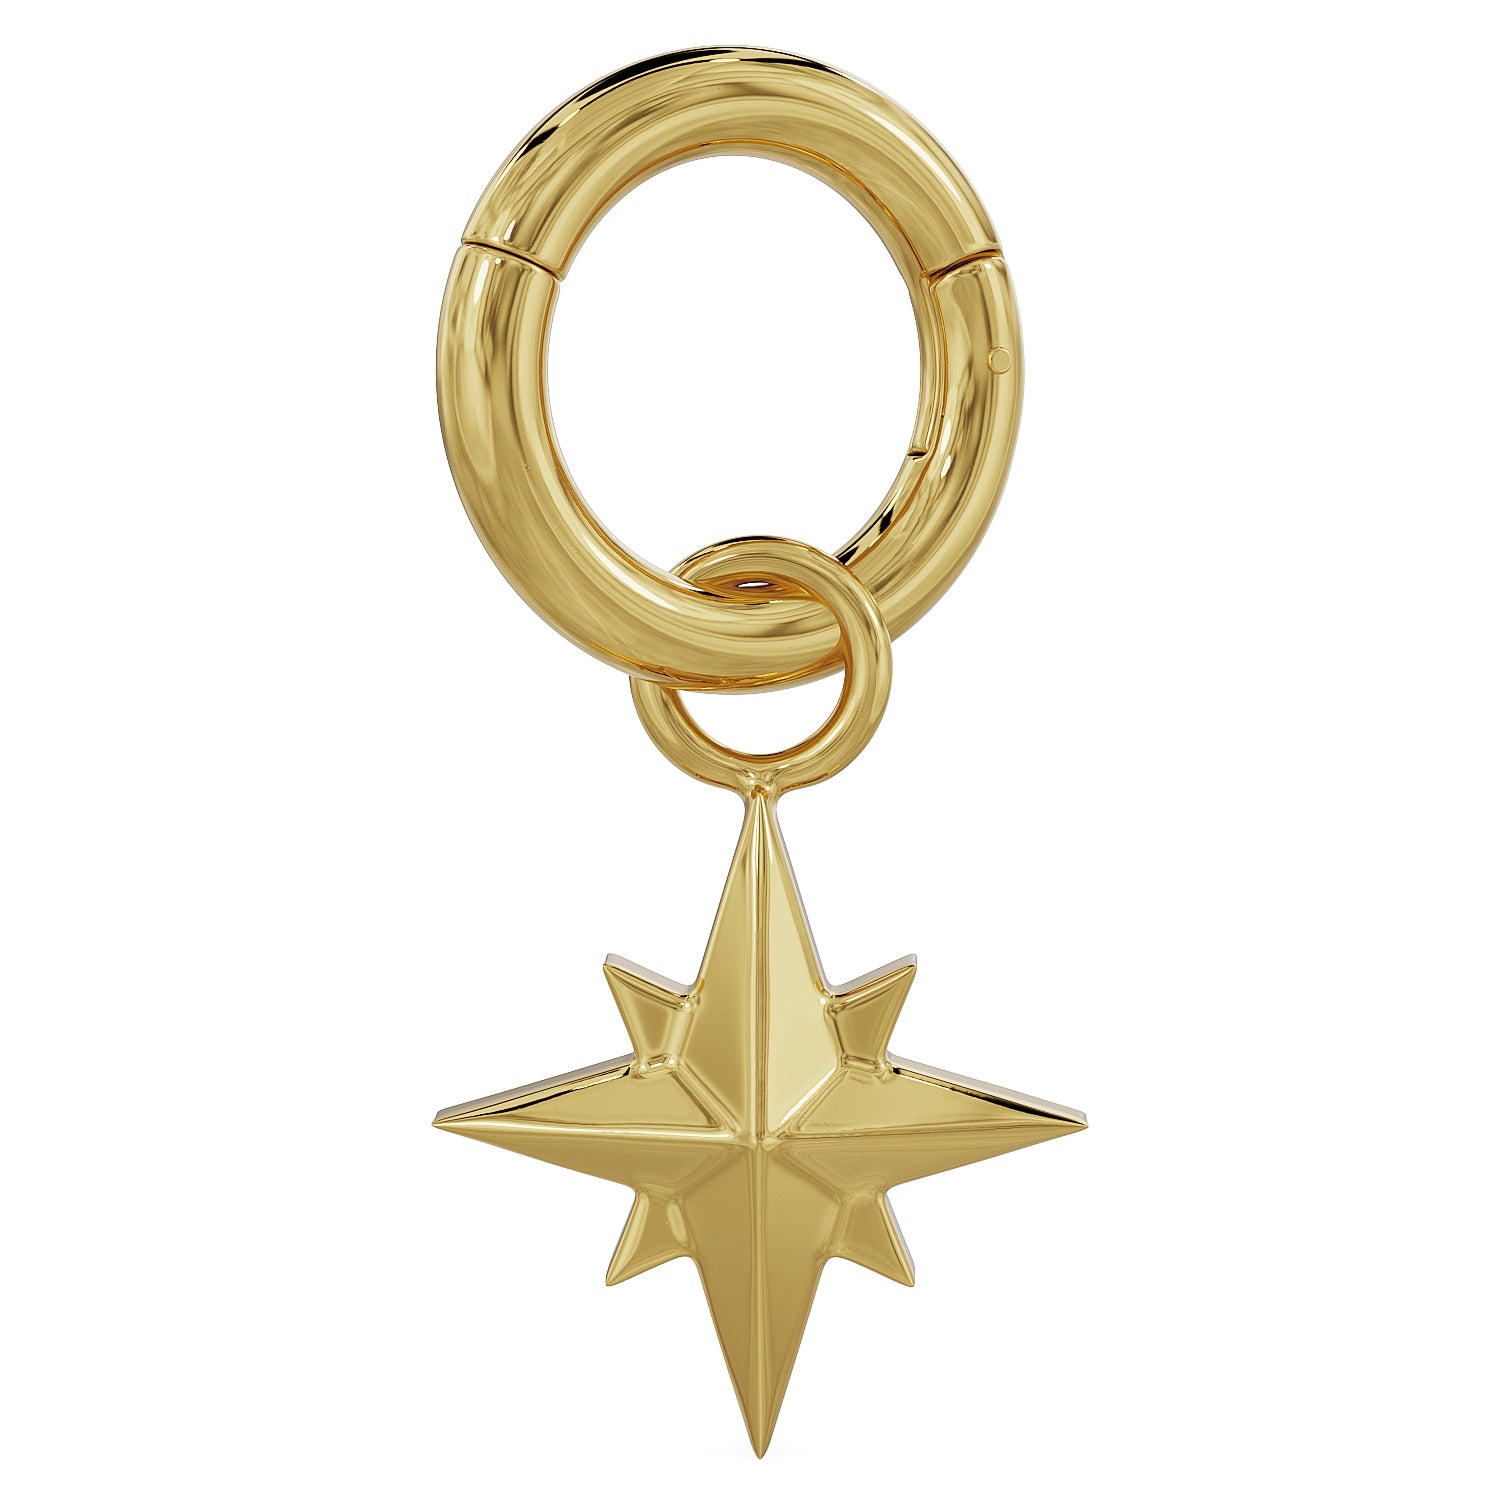 Clicker Ring & 14k Gold - North Star Charm Accessory for Piercing Jewelry